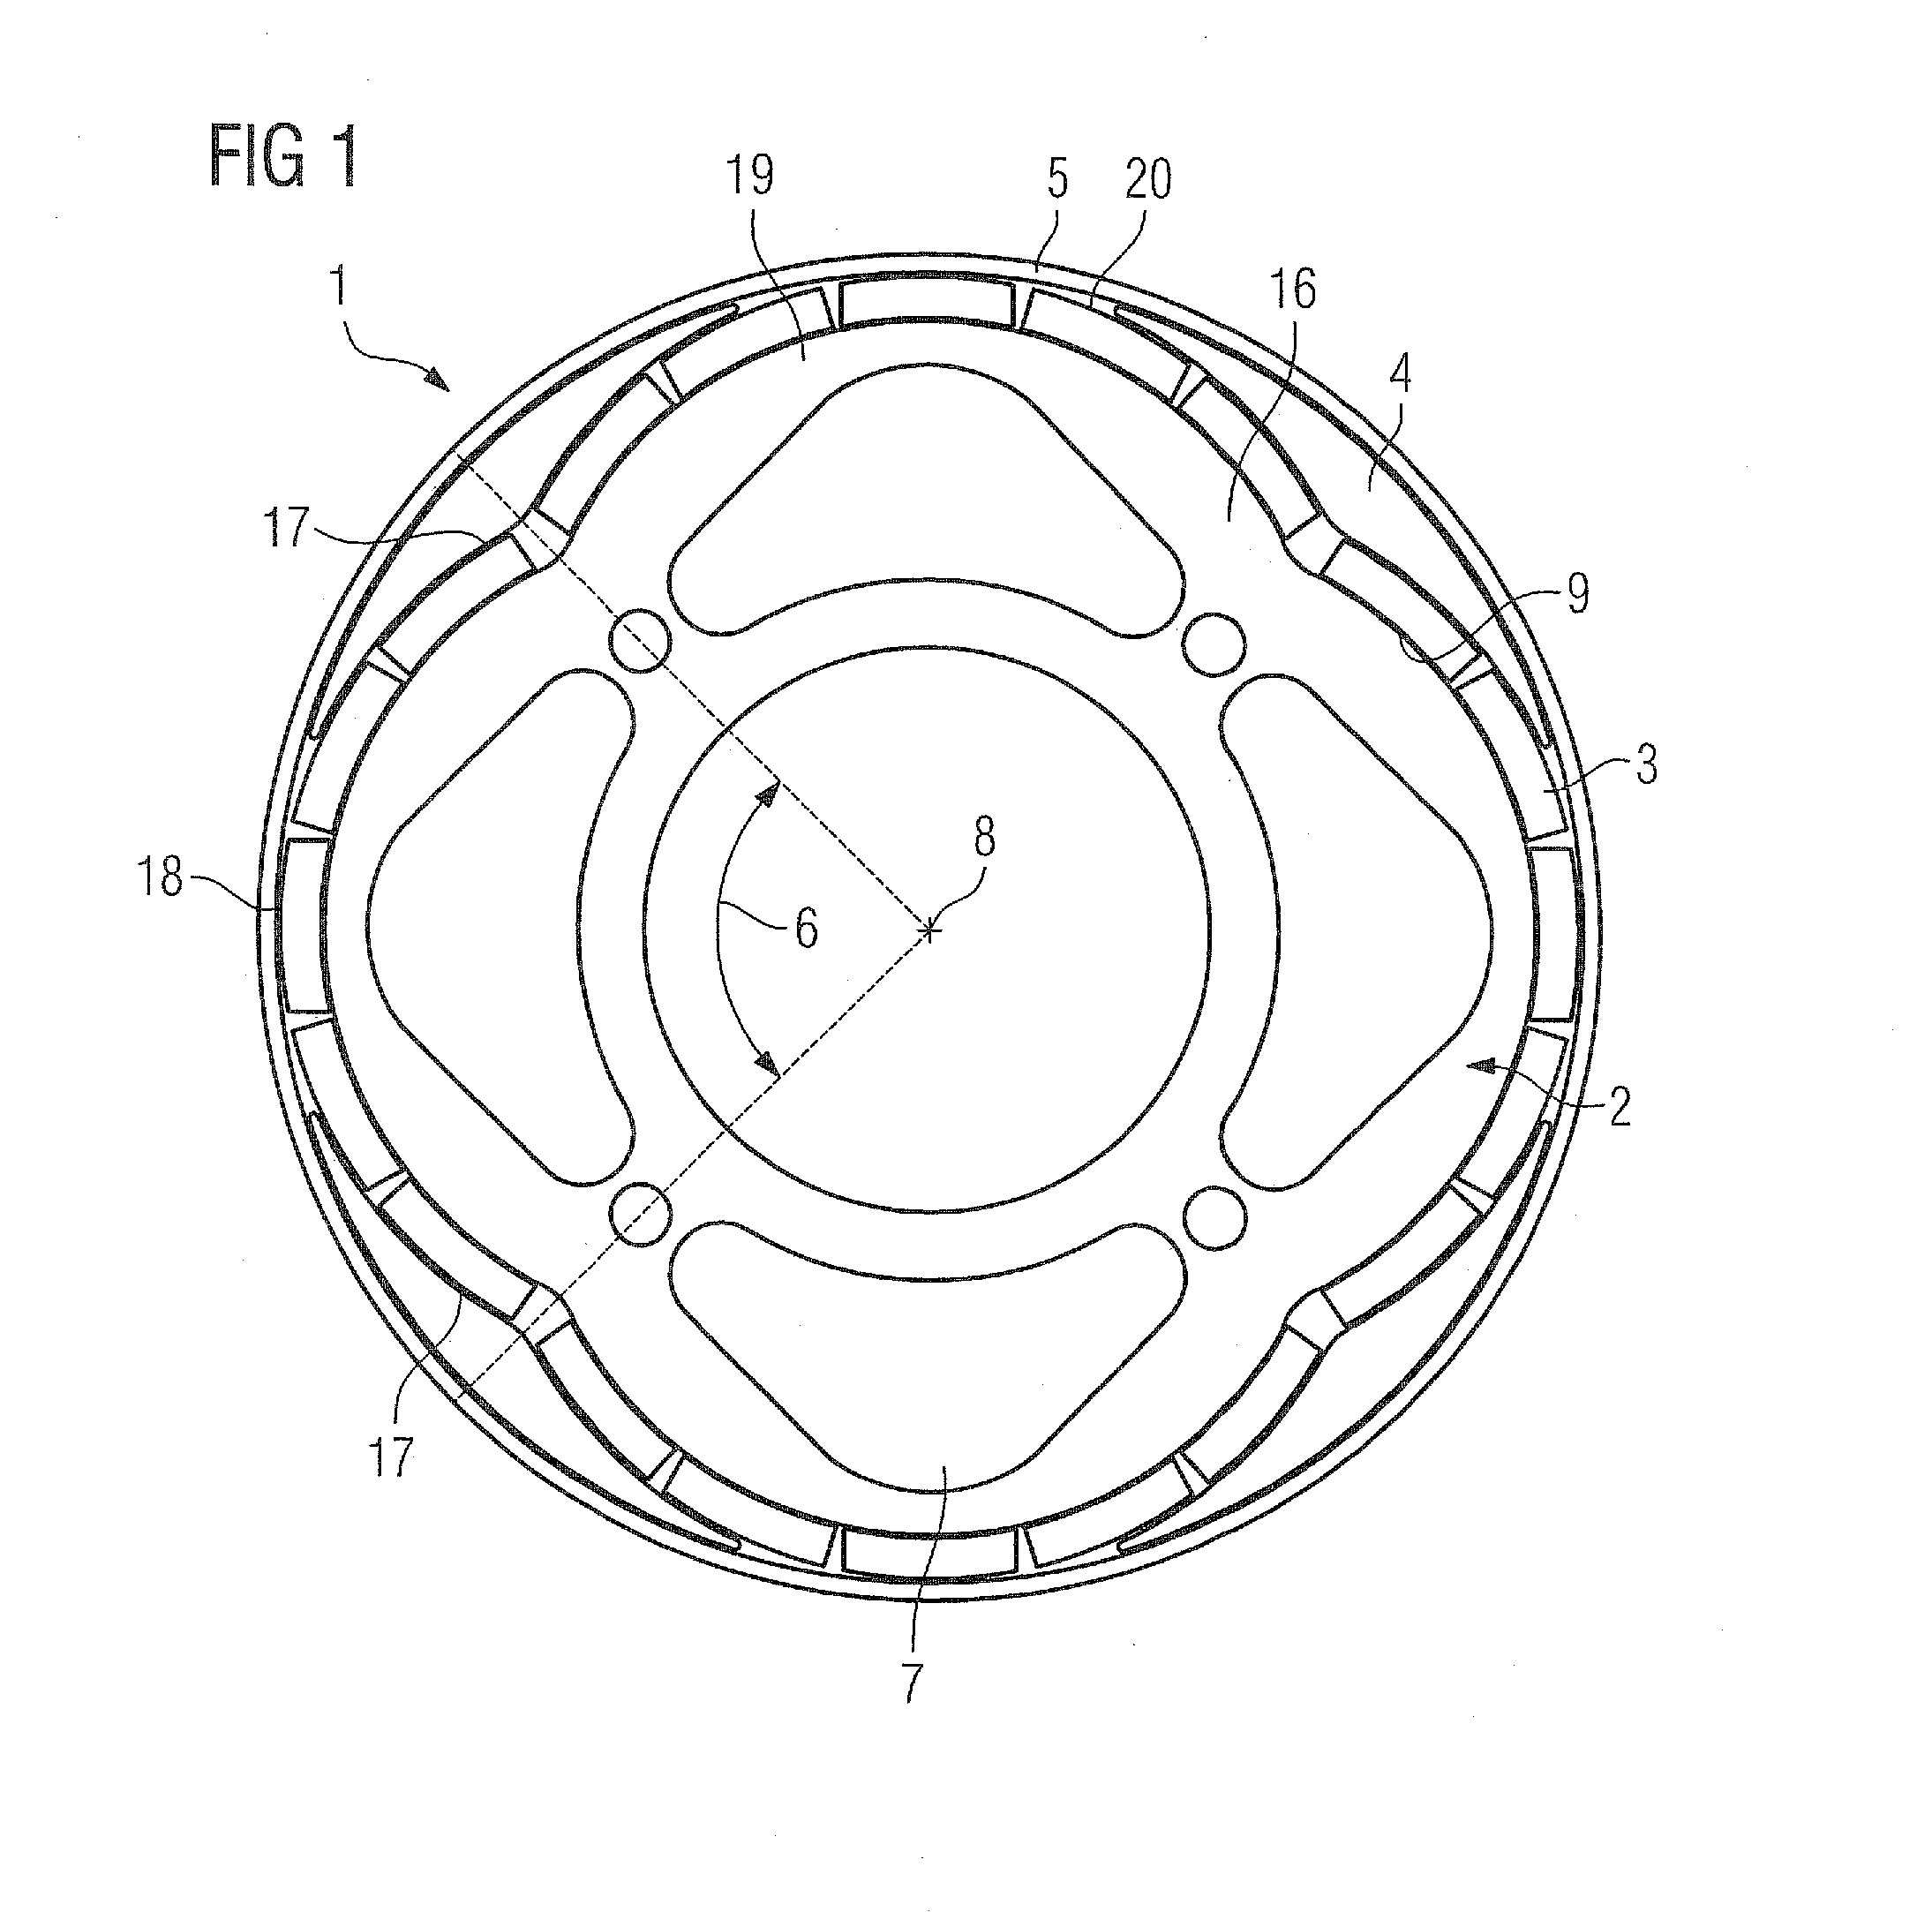 Rotor of a permanent magnet synchronous machine